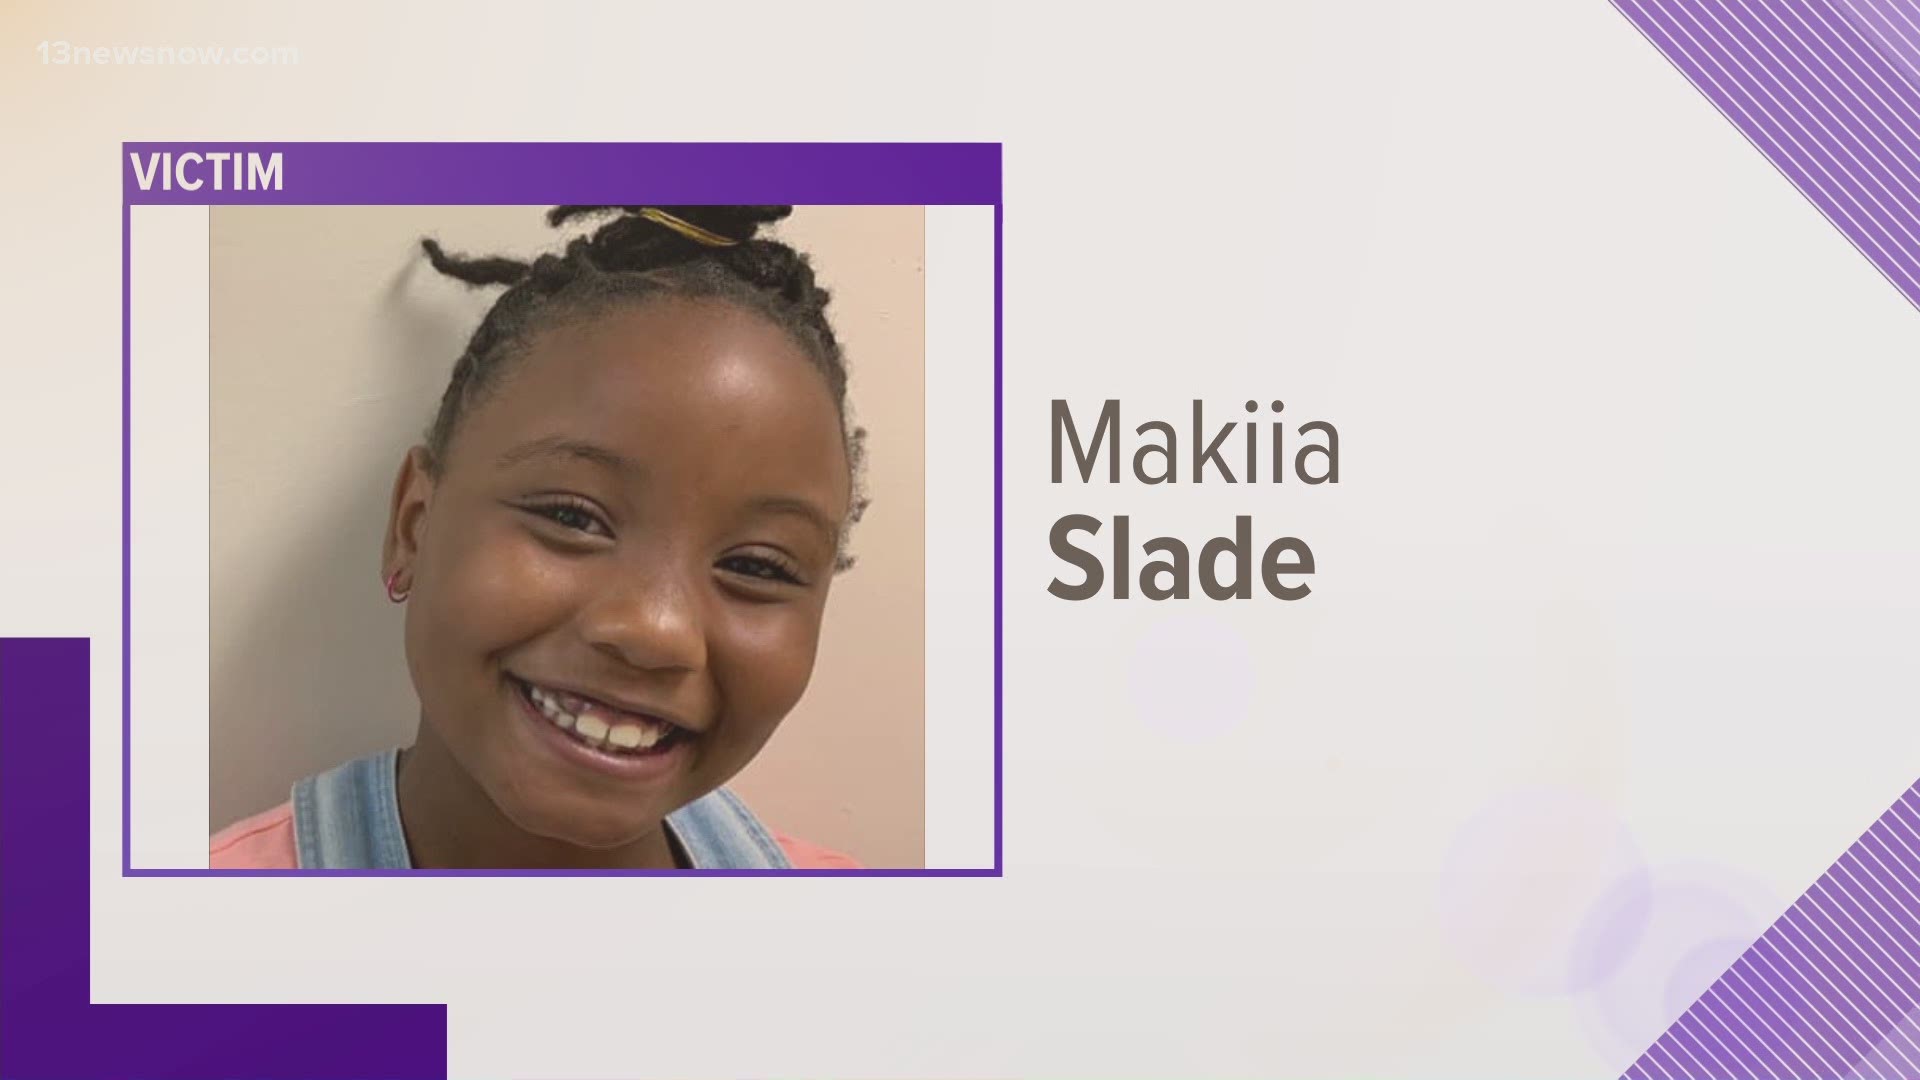 Investigators are investigating the homicide of 9-year-old Makiia Slade, of Edenton. Her mother is in the hospital, being treated for gunshot injuries.